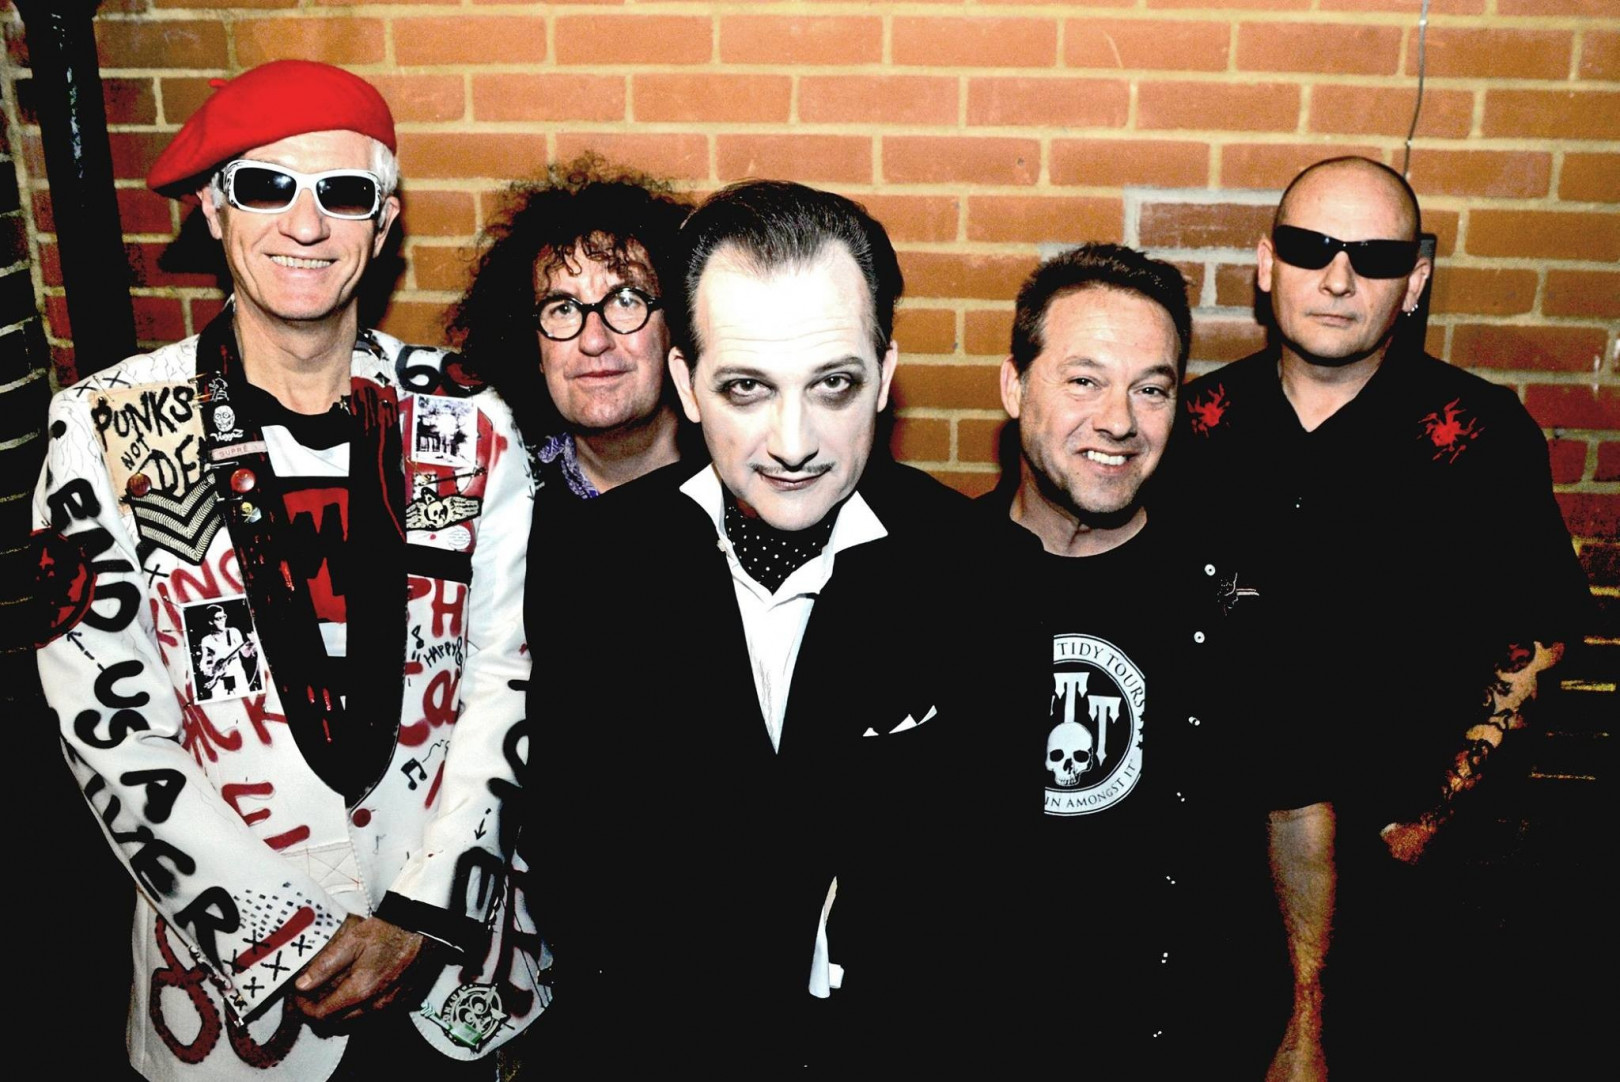 Damned to play majority of 'Darkadelic' on tour before LP release